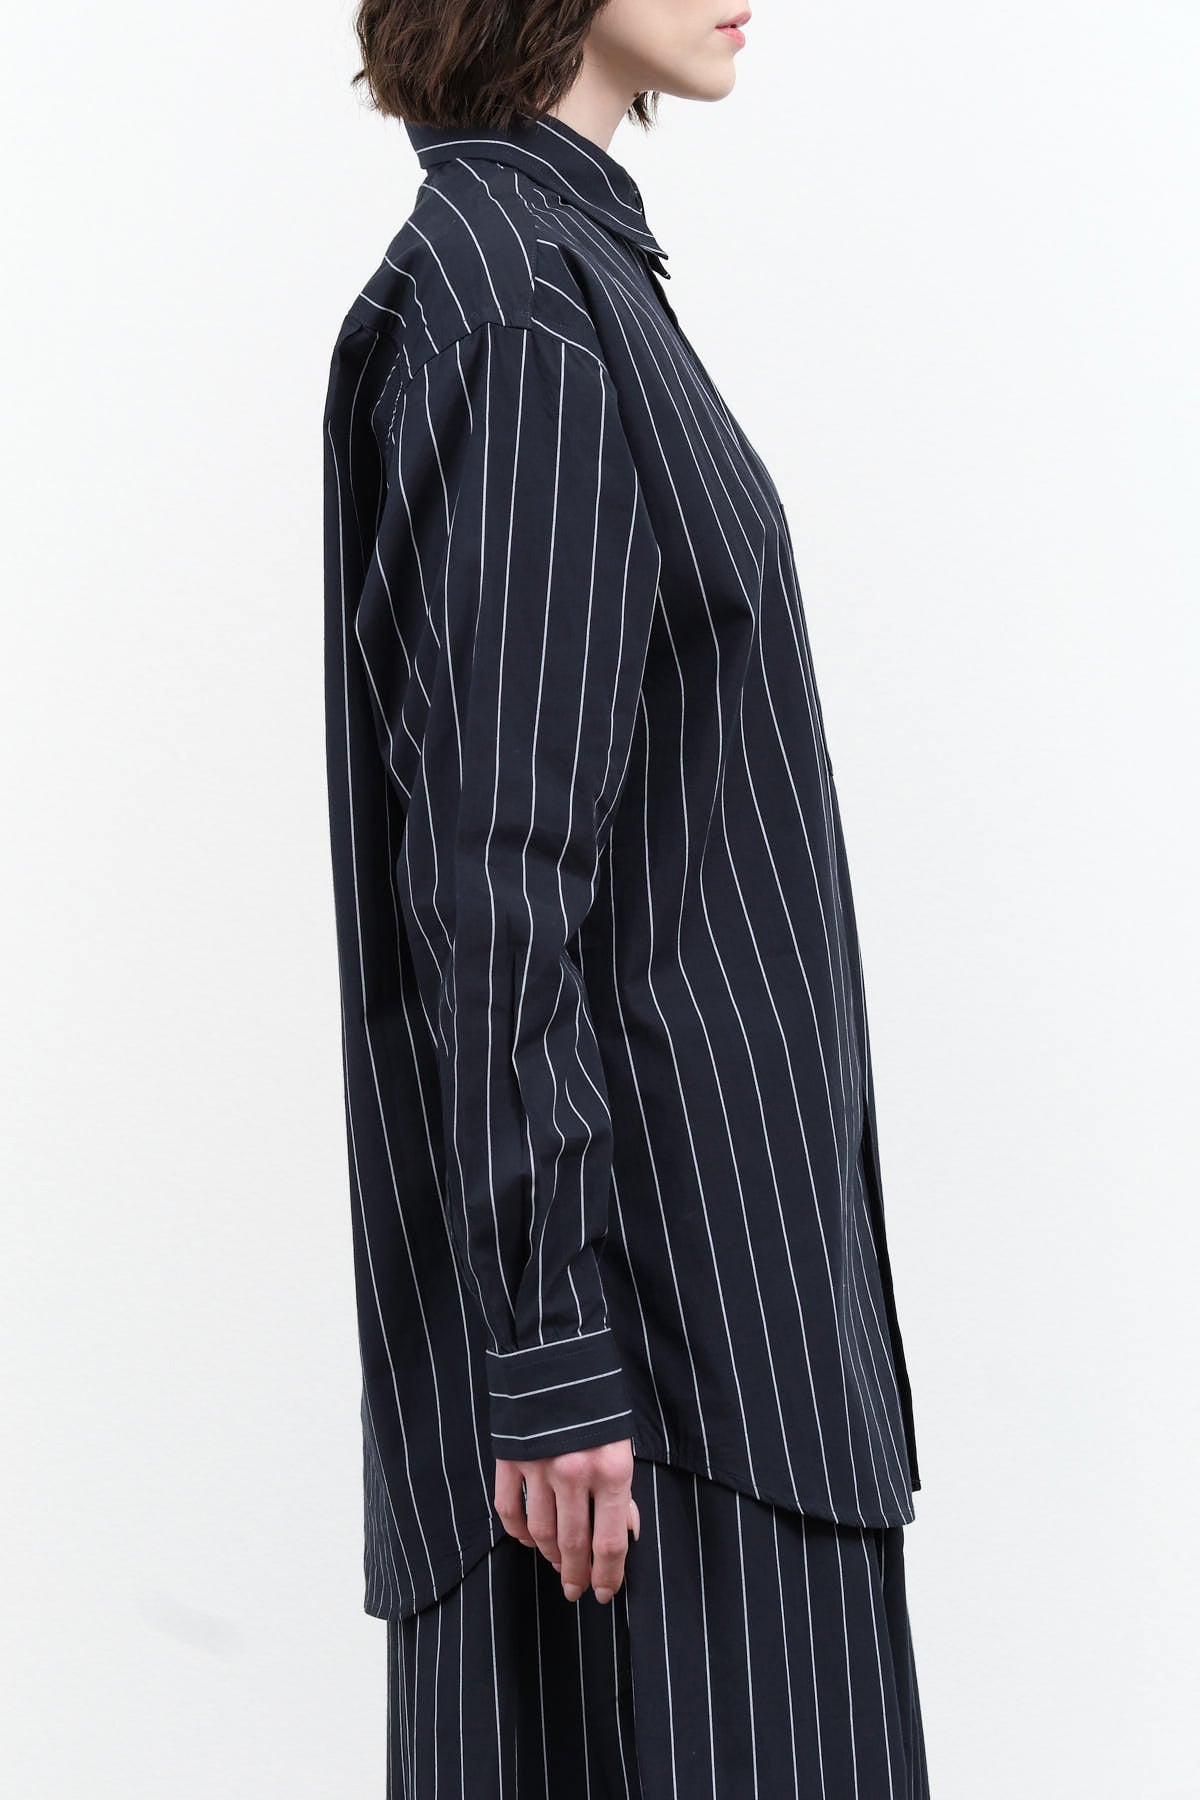 Long Sleeve Collared James Shirt in Navy Pinstripe by Kowtow